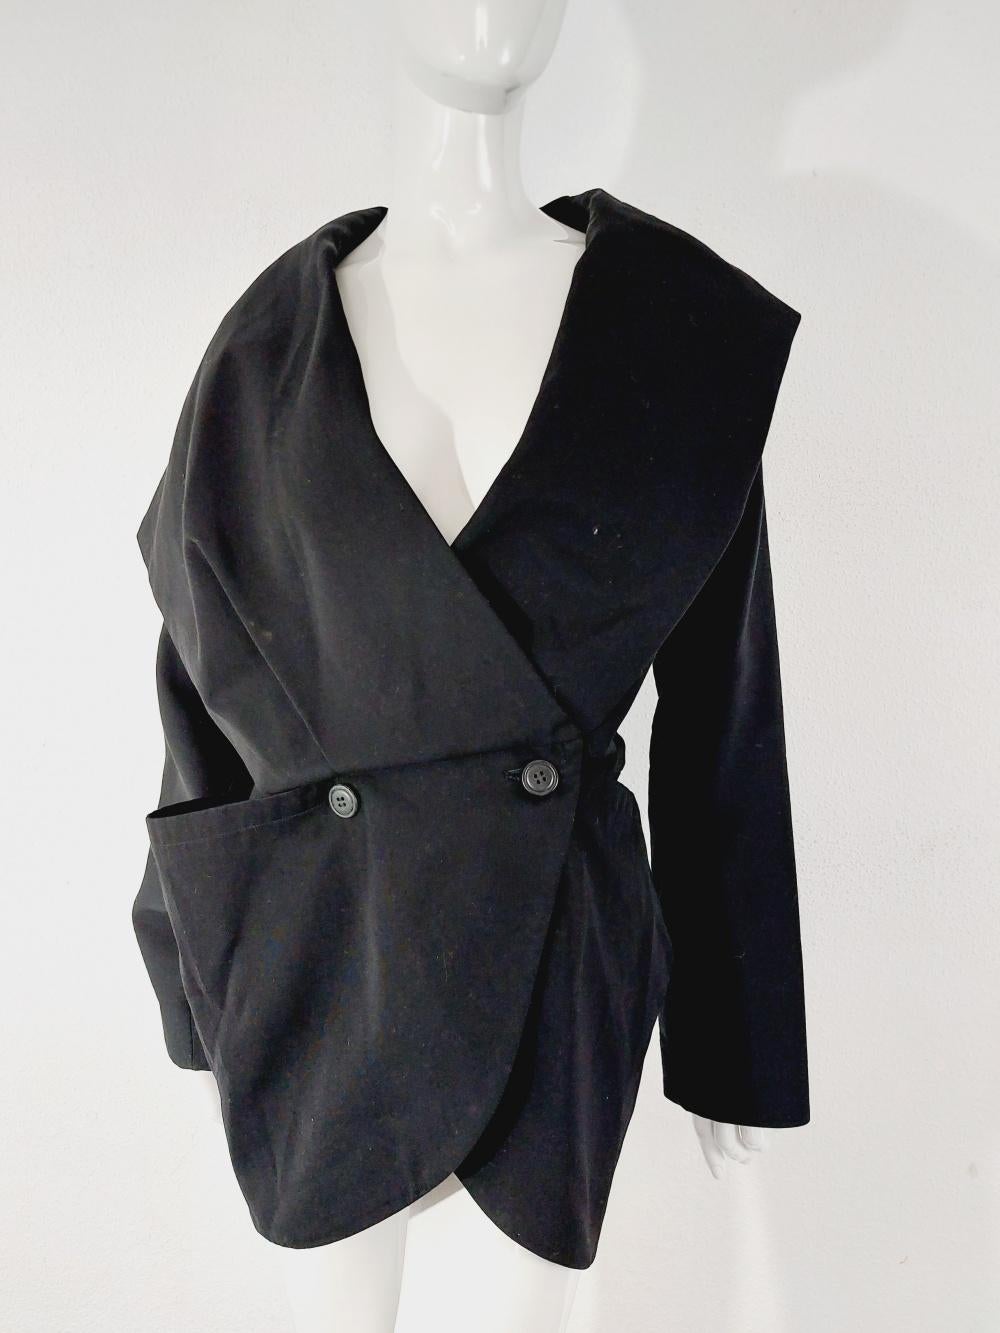 Issey Miyake Exaggerated Dramatic Asymmetric Silhouette Formal Coat Jacket In Excellent Condition For Sale In PARIS, FR